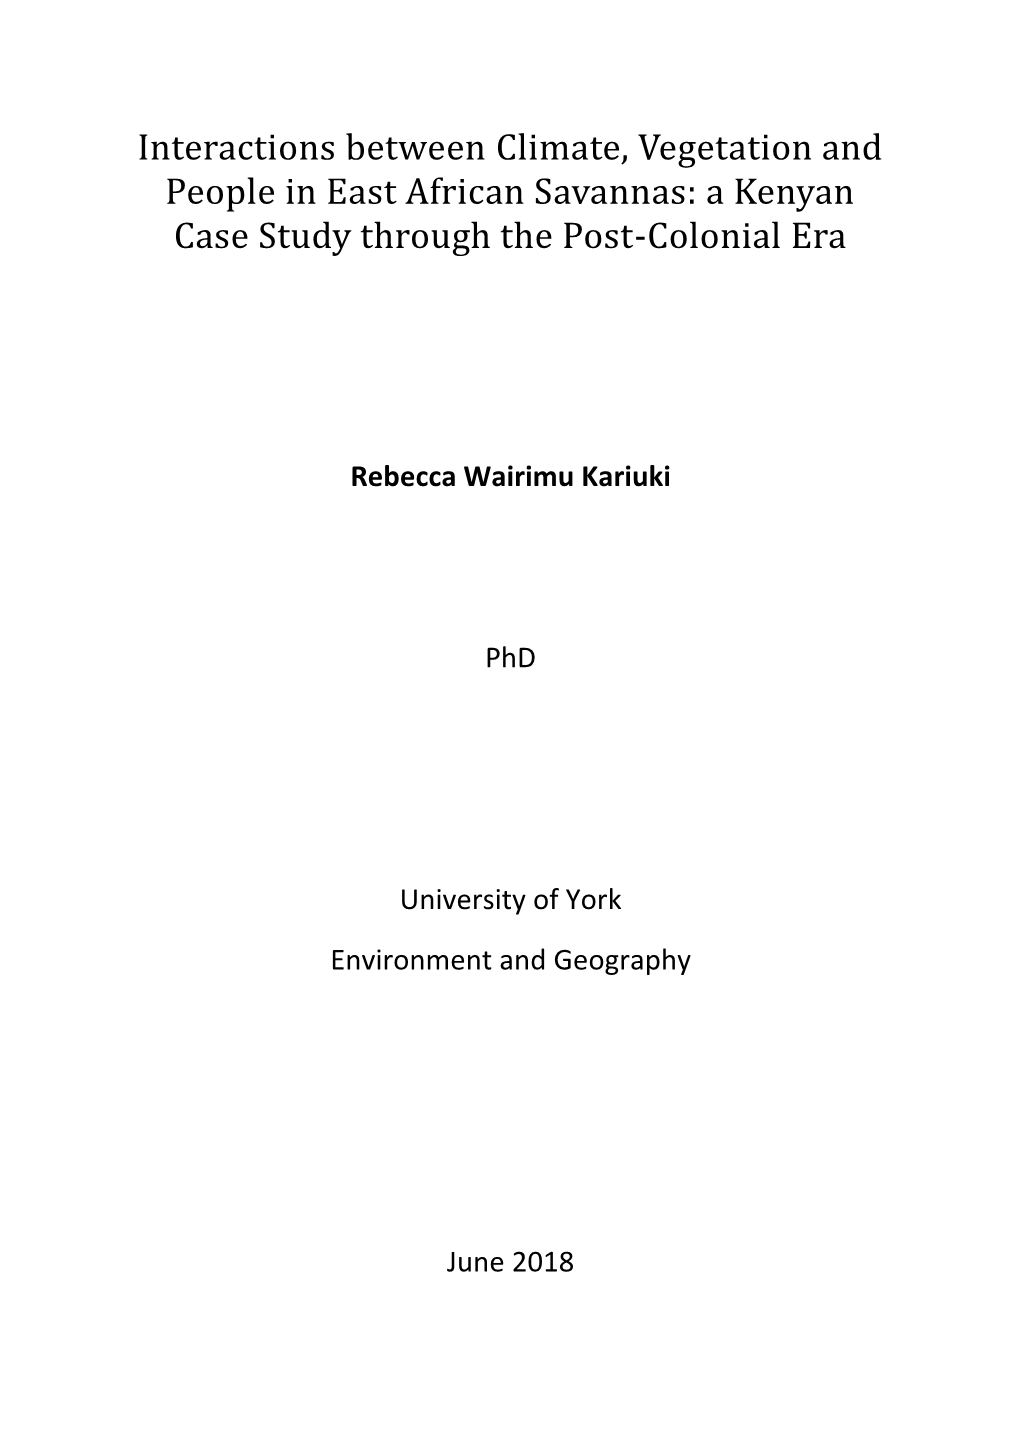 Interactions Between Climate, Vegetation and People in East African Savannas: a Kenyan Case Study Through the Post-Colonial Era